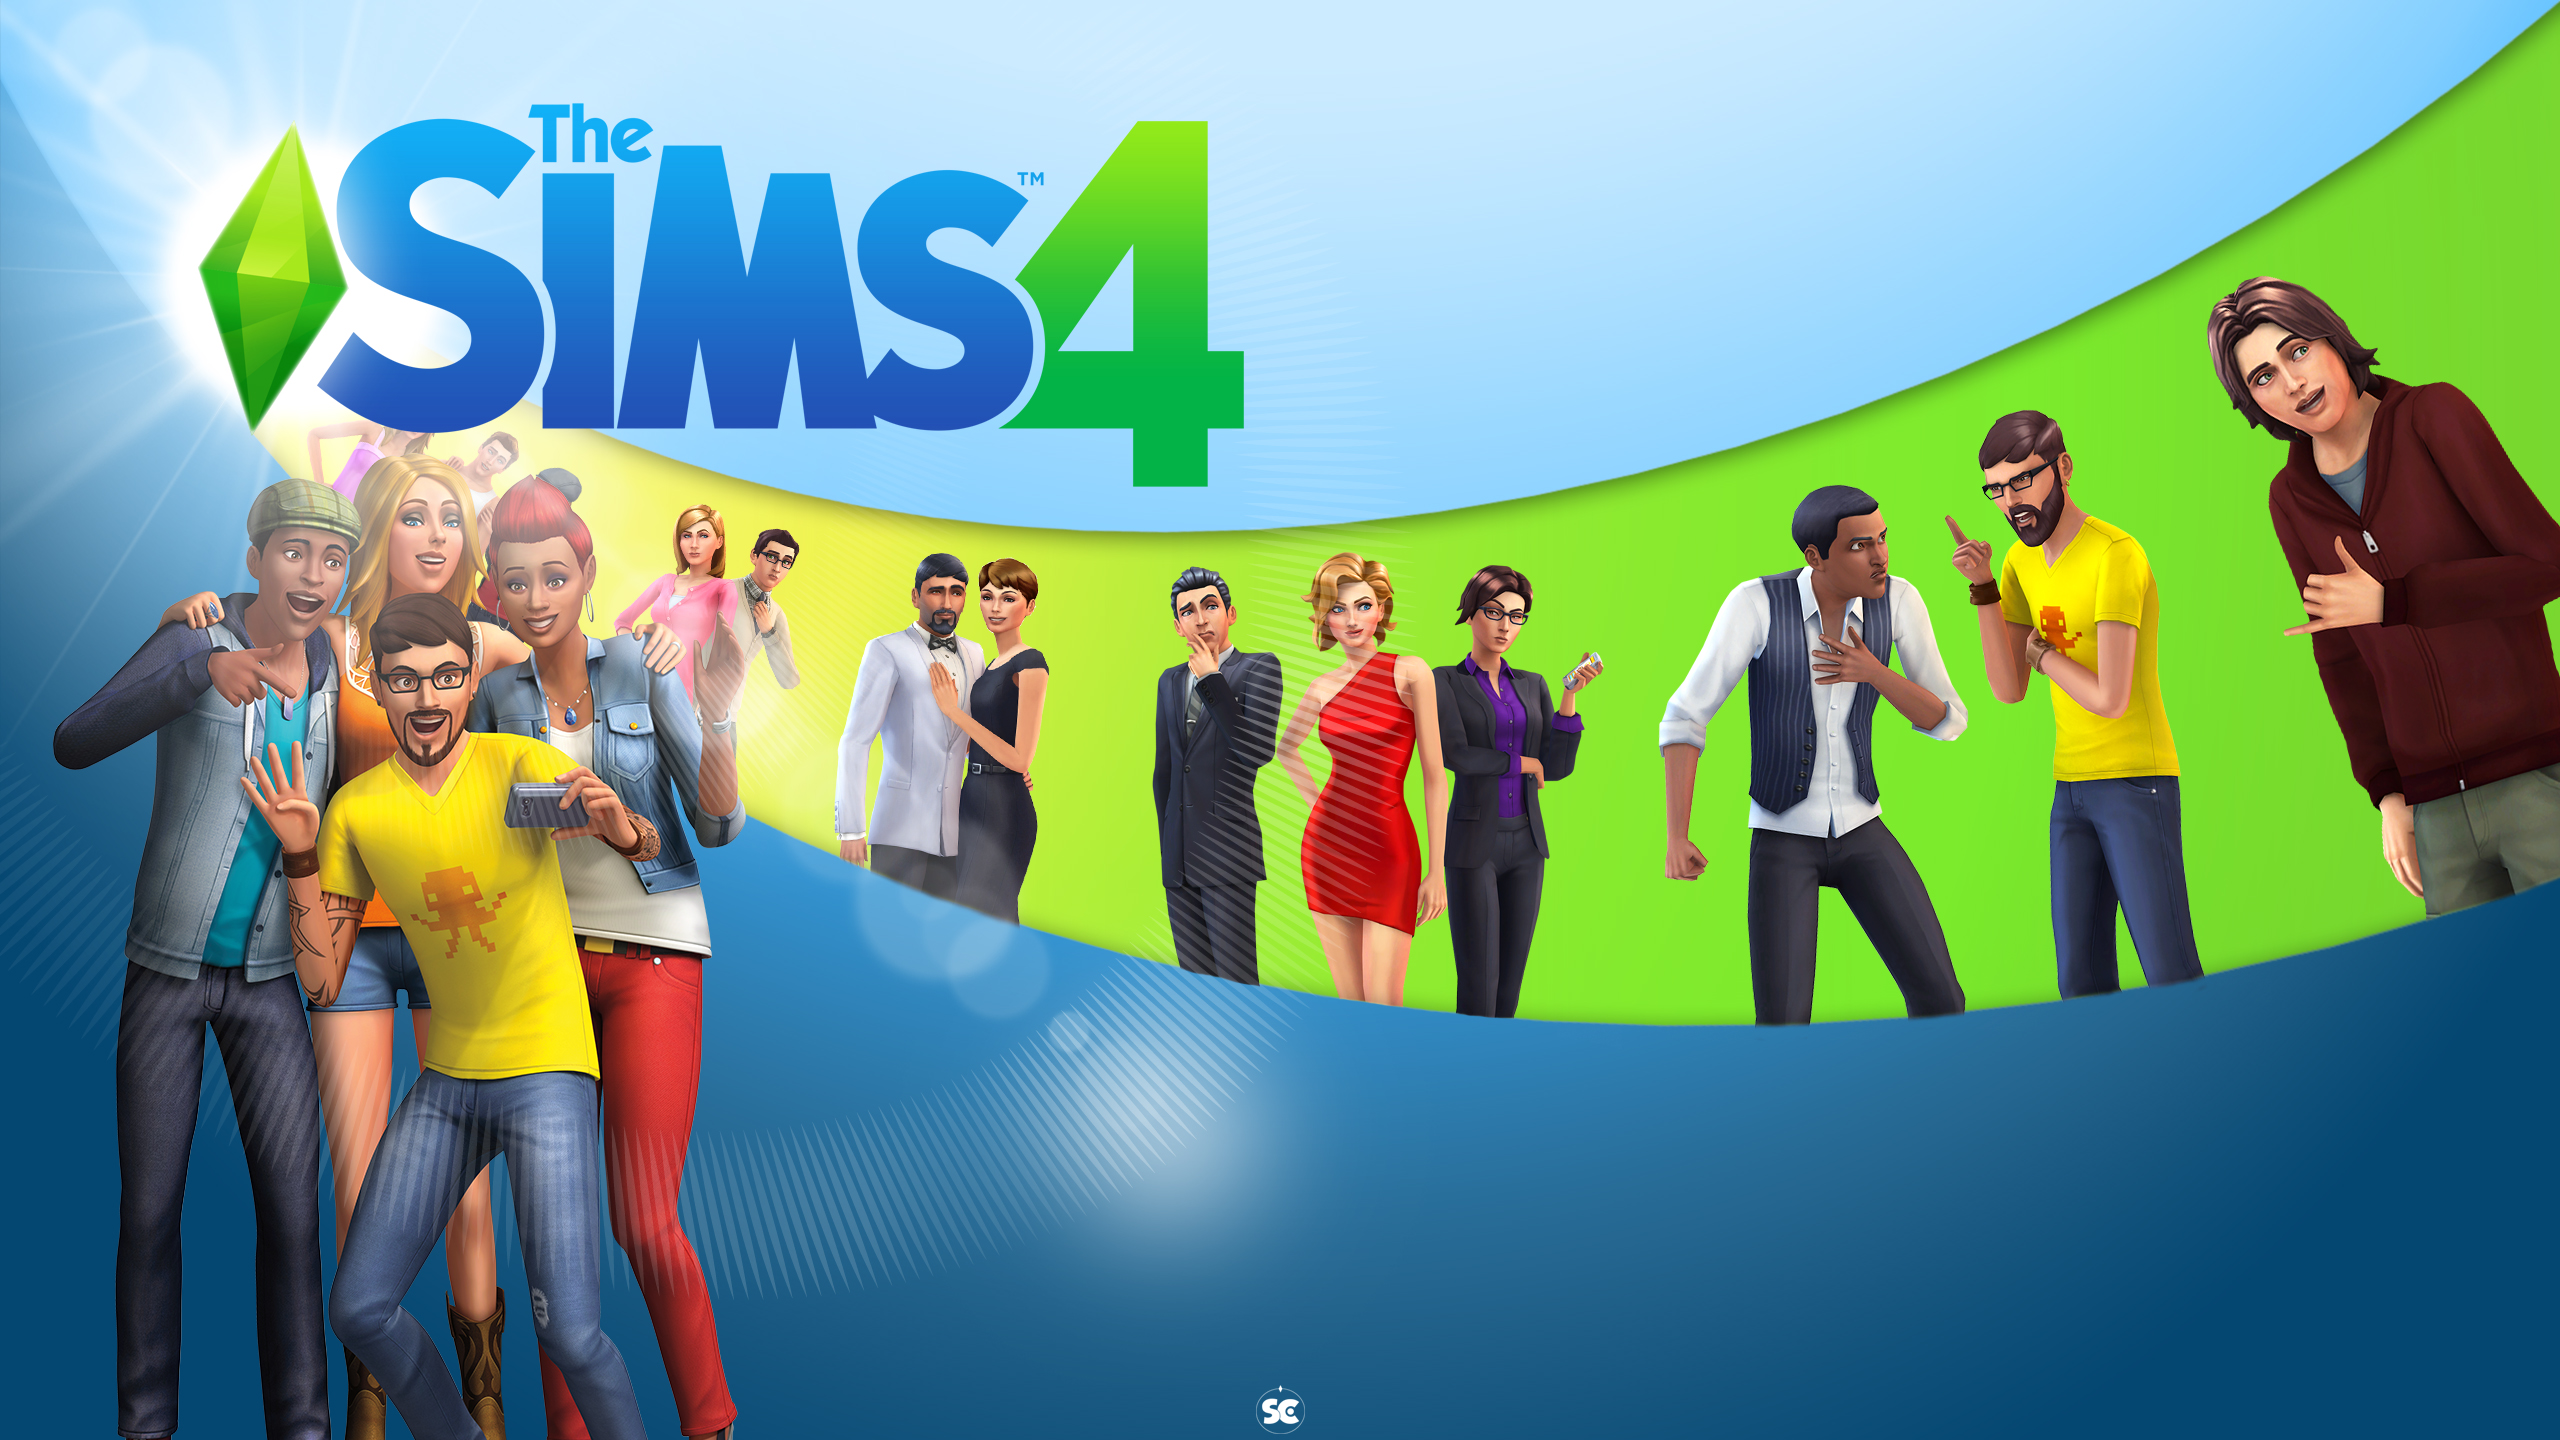 The Sims Wallpaper High Resolution And Quality